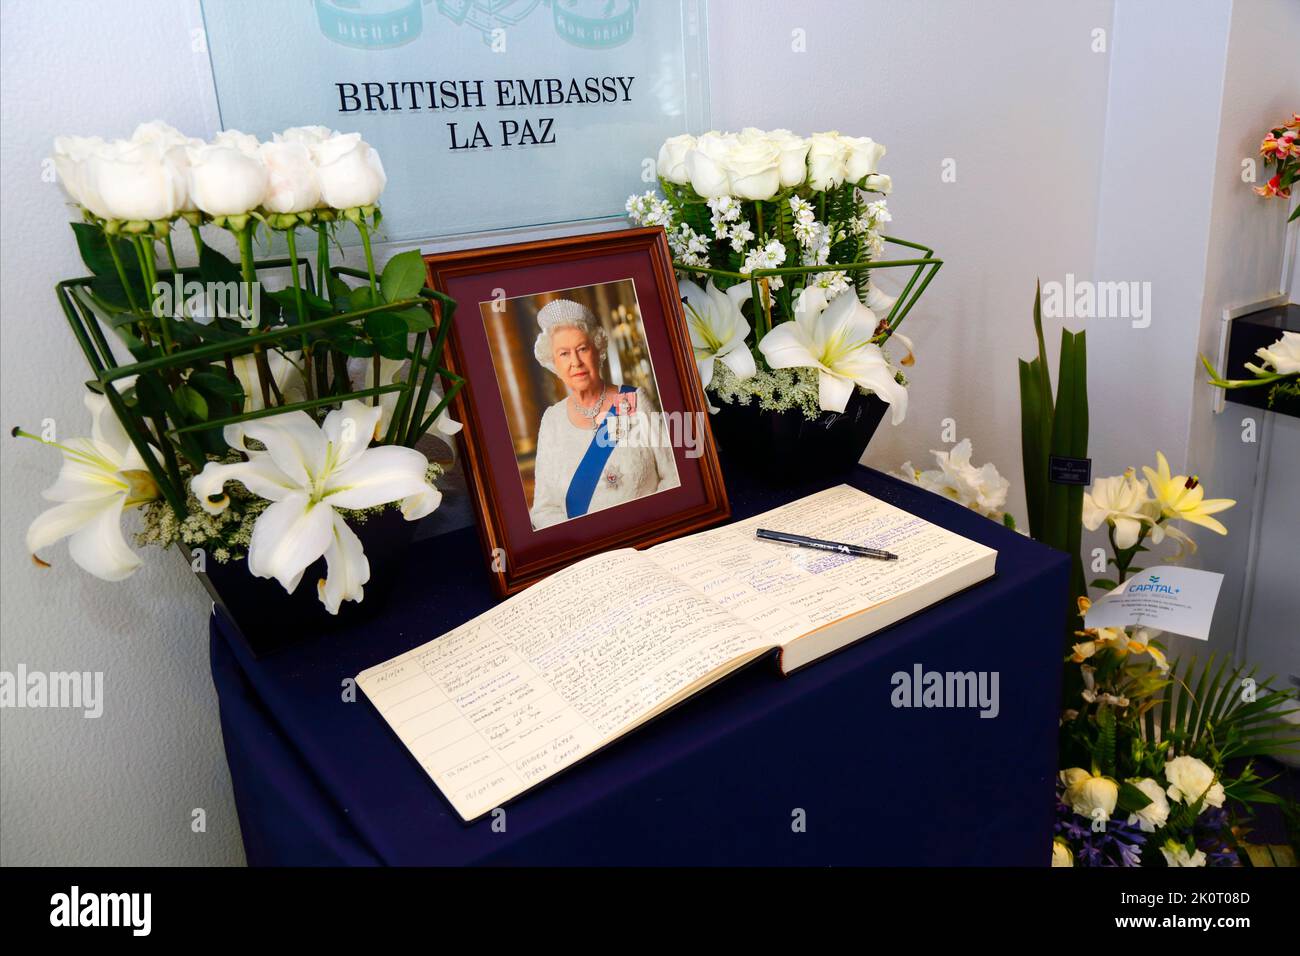 La Paz, Bolivia 13th September 2022: The Book of Condolence in the British Embassy in La Paz for people to leave tributes to Queen Elizabeth II, who died at Balmoral Castle on 8th September aged 96 after reigning for 70 years and 214 days, the longest reign of any British monarch. Stock Photo